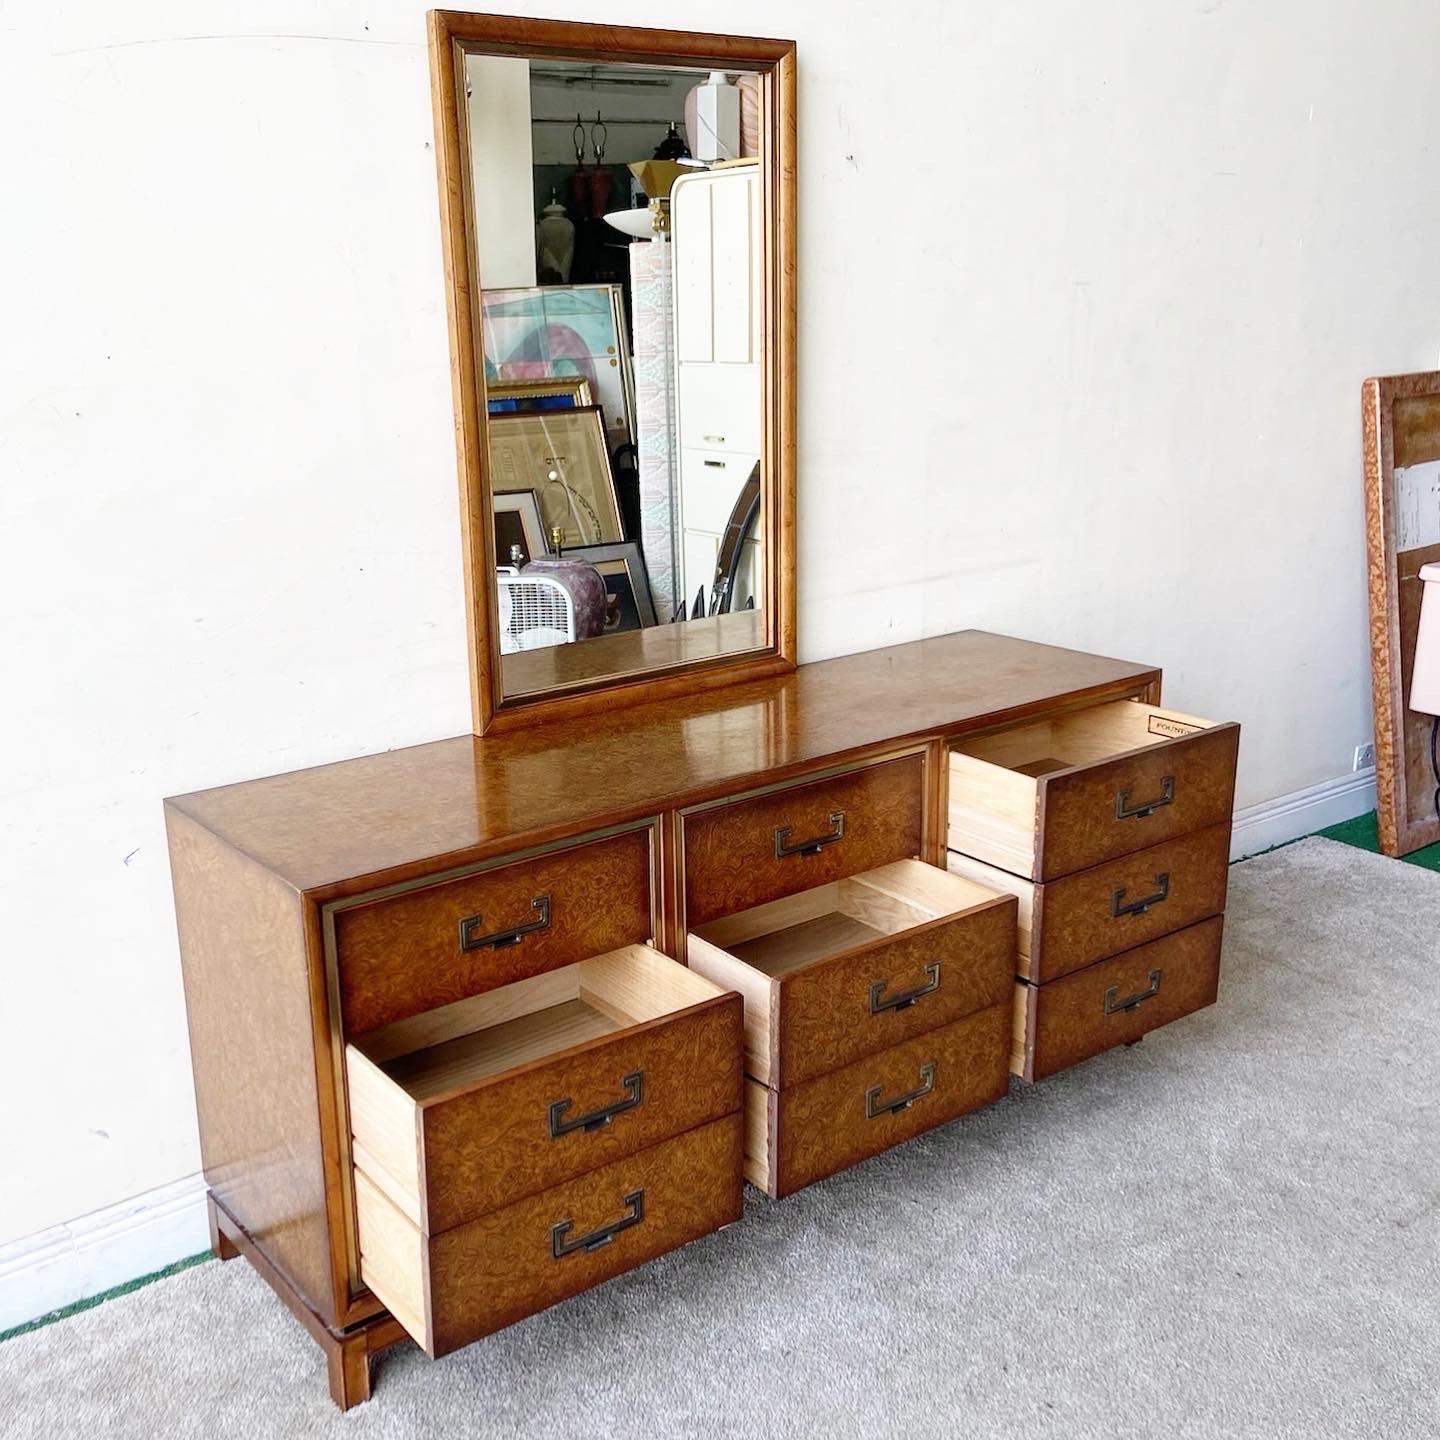 Exceptional mid century chinoiserie dresser with mirror by Founders. Features a Burl wood veneer with brass inlaid drawer pulls.

Mirror measures 27.5”W, 2”D, 43.5”H